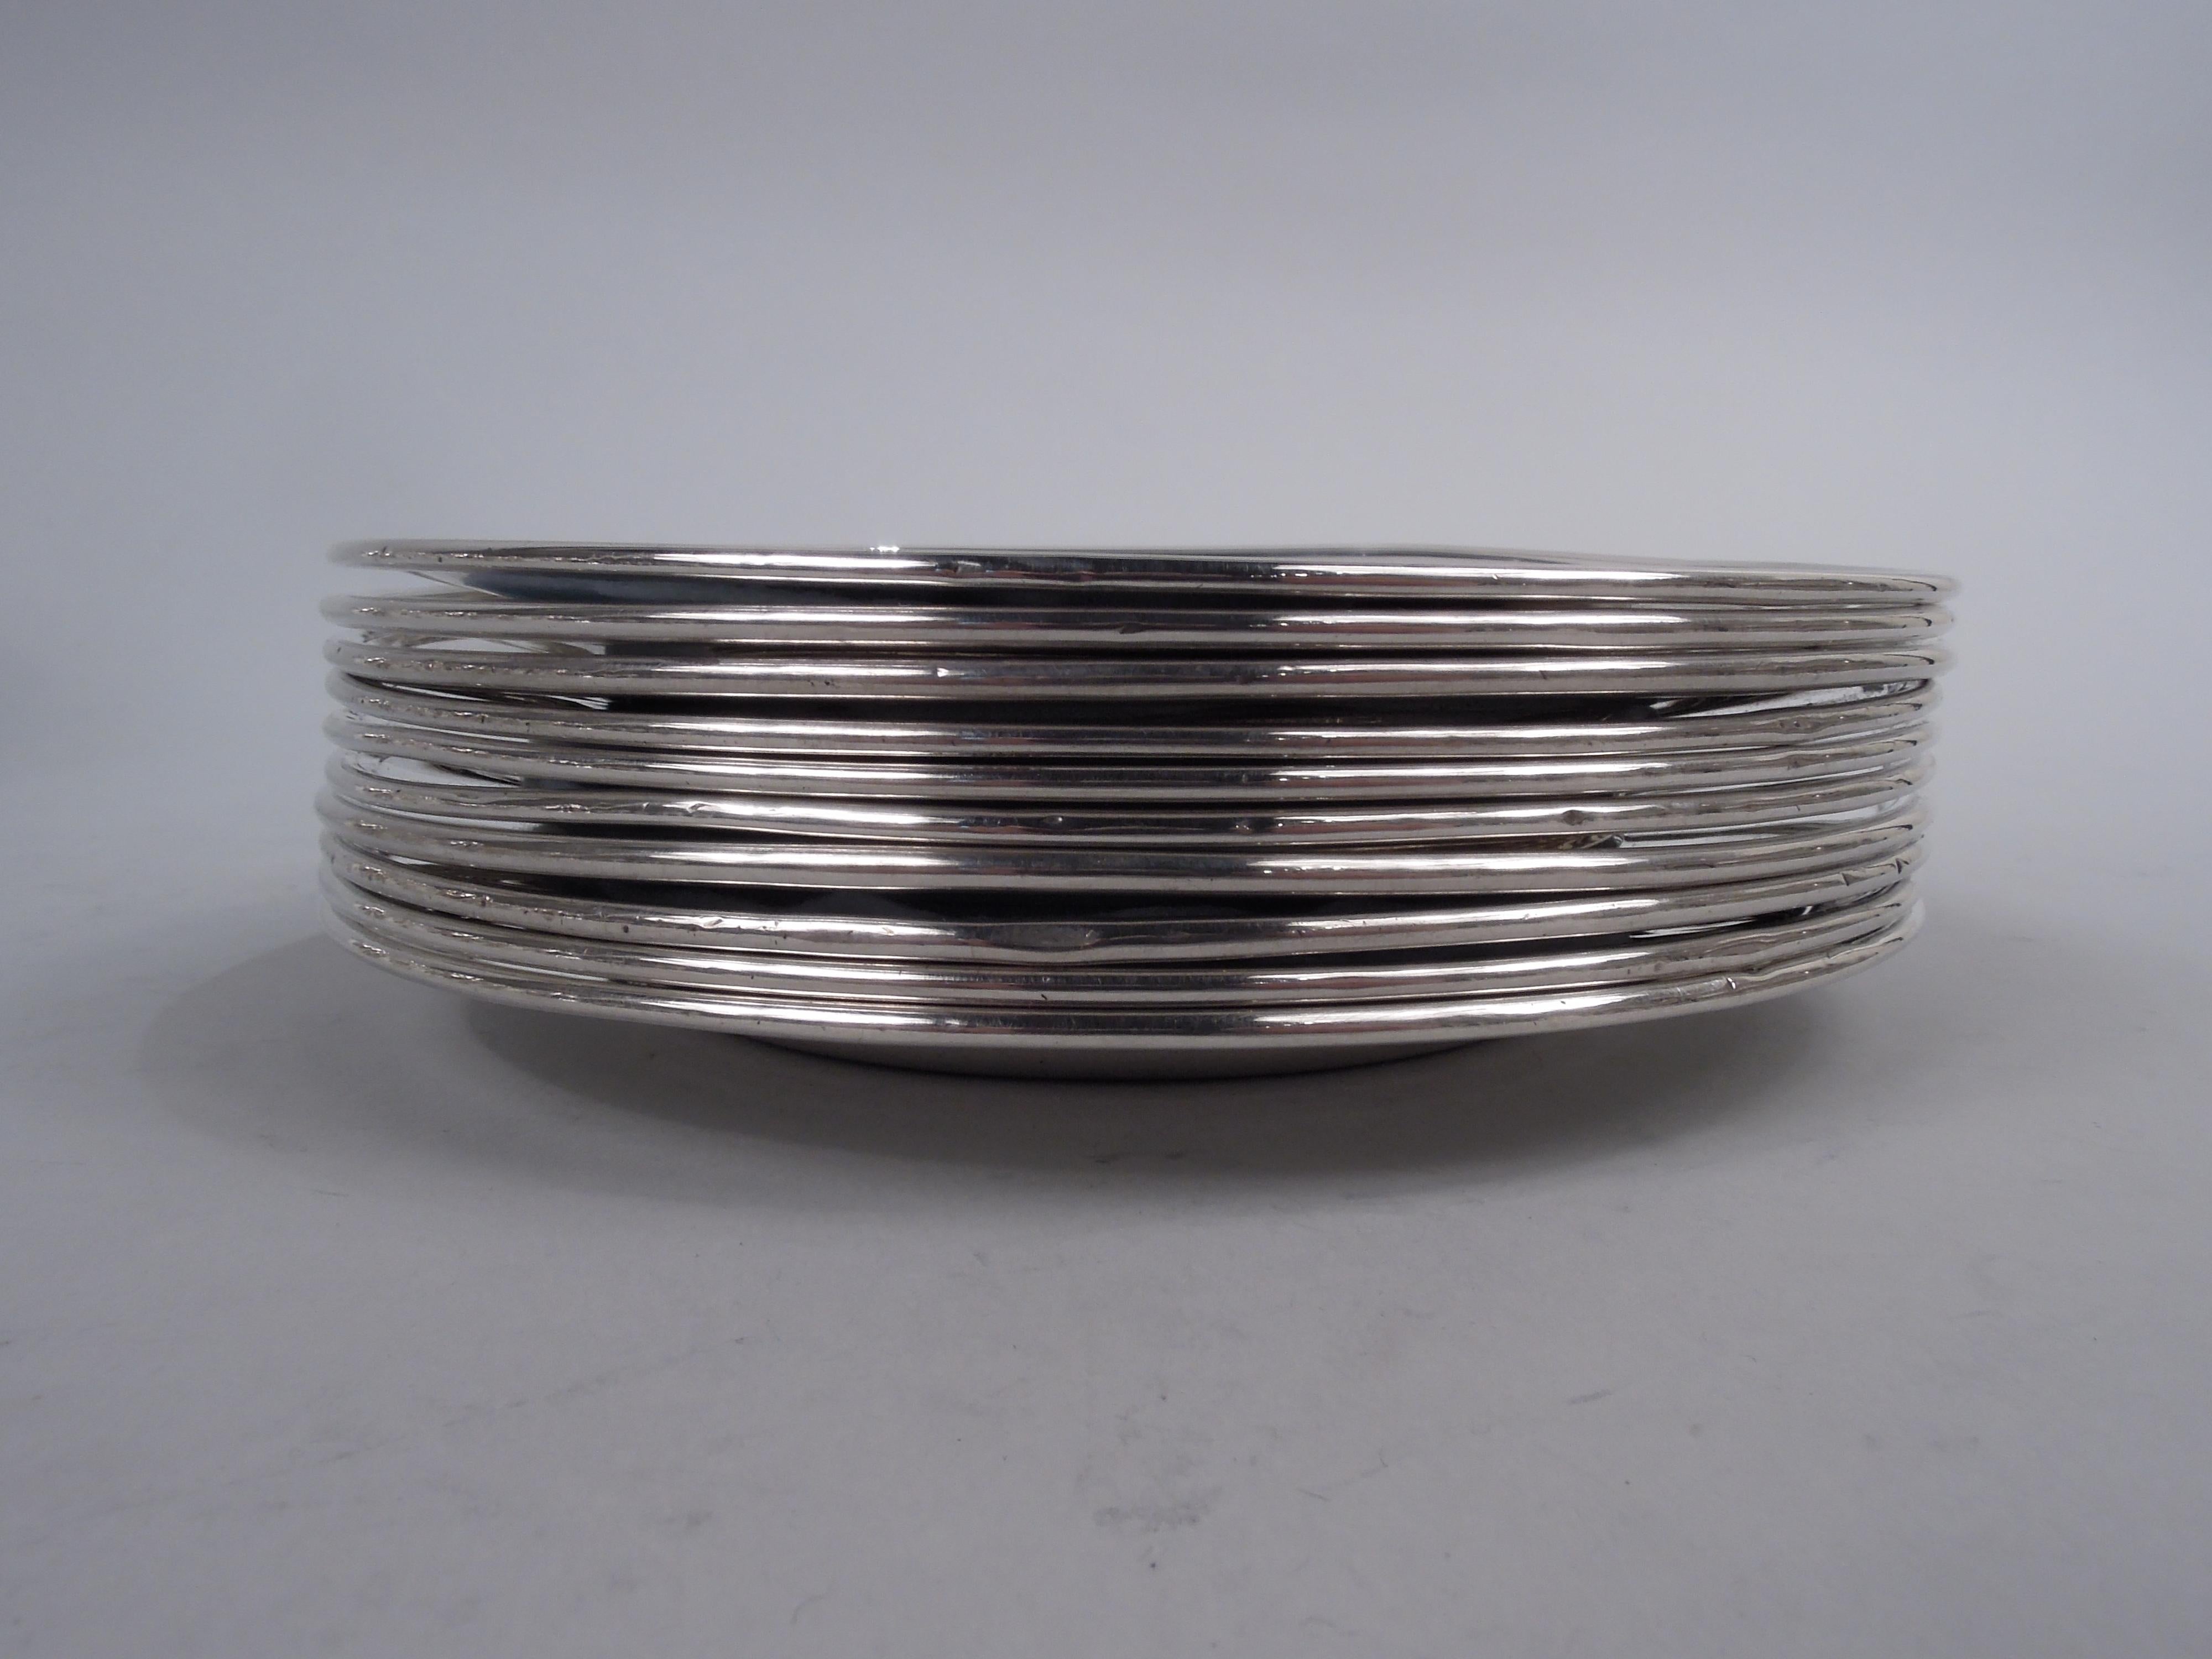 Set of 10 Modern sterling silver bread and butter plates. Made by Tiffany & Co. in New York, ca 1912. Each: Round and deep well, wide tapering shoulder, and molded rim. Fully marked including maker’s stamp, pattern no. 18249 (first produced in